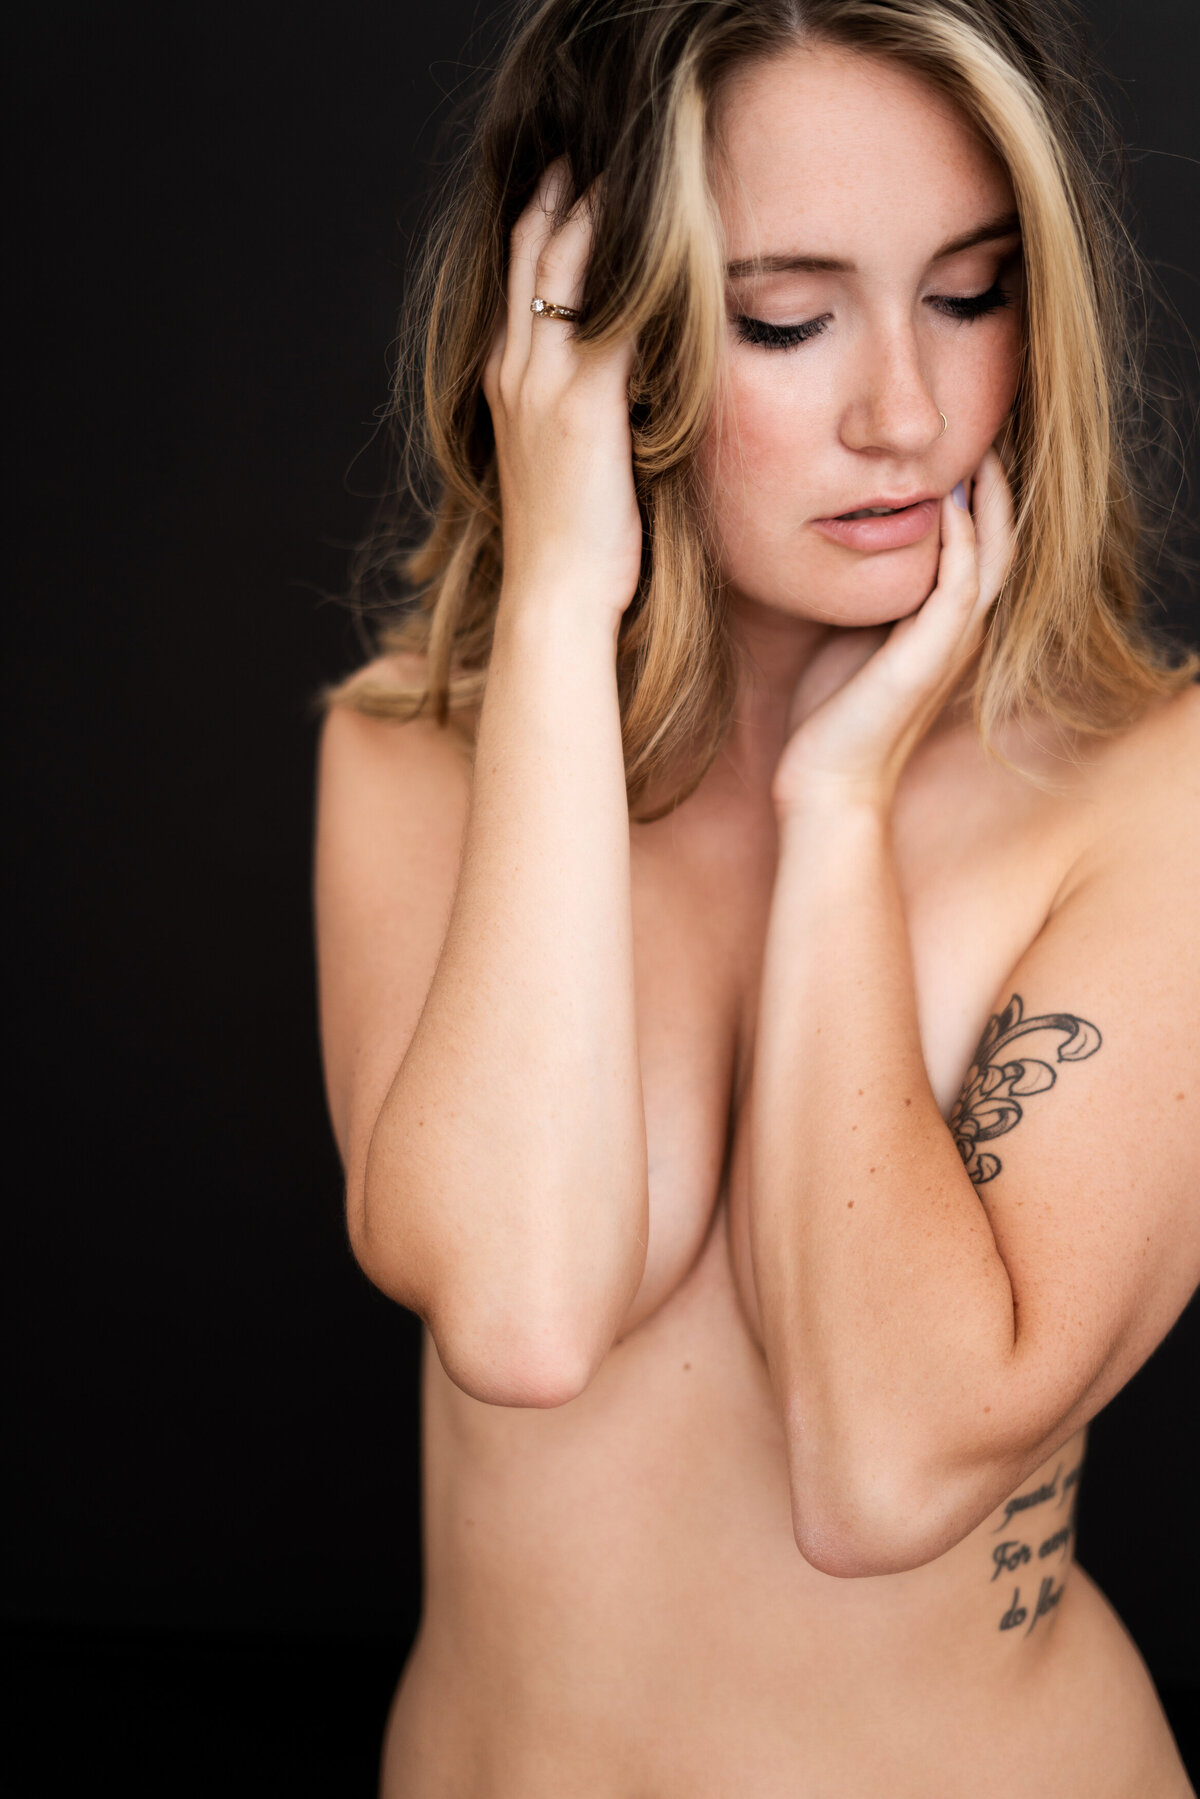 implied nude woman with tattoos hands on face and in hair